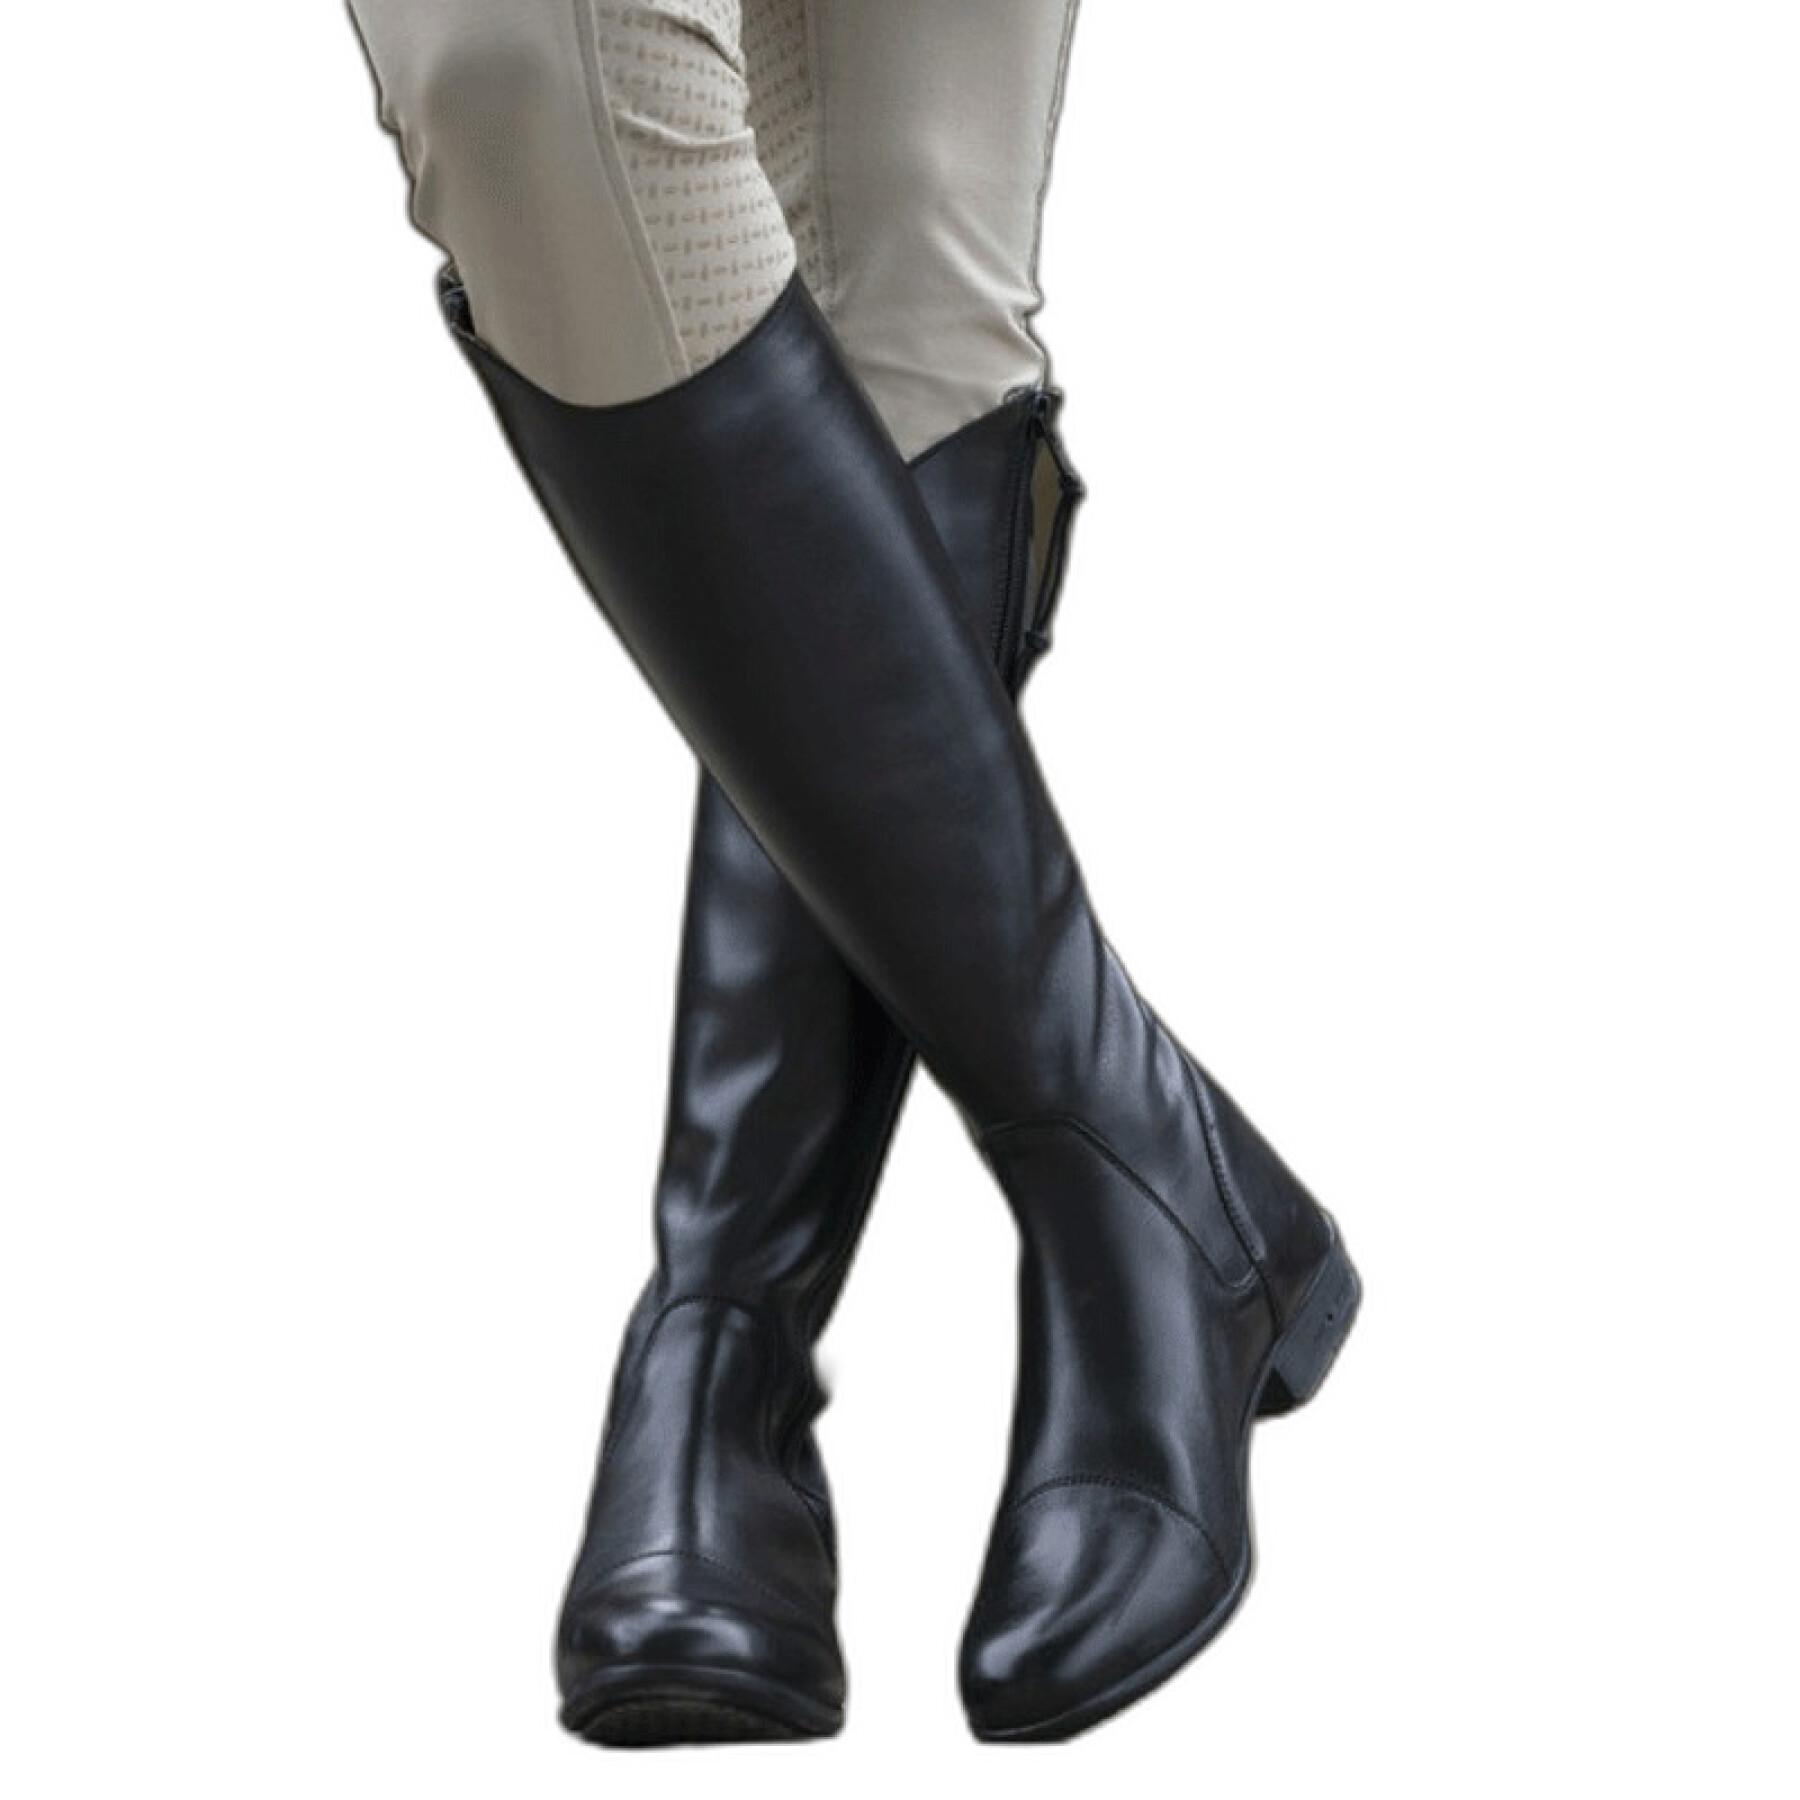 Leather riding boots Norton Easyfit